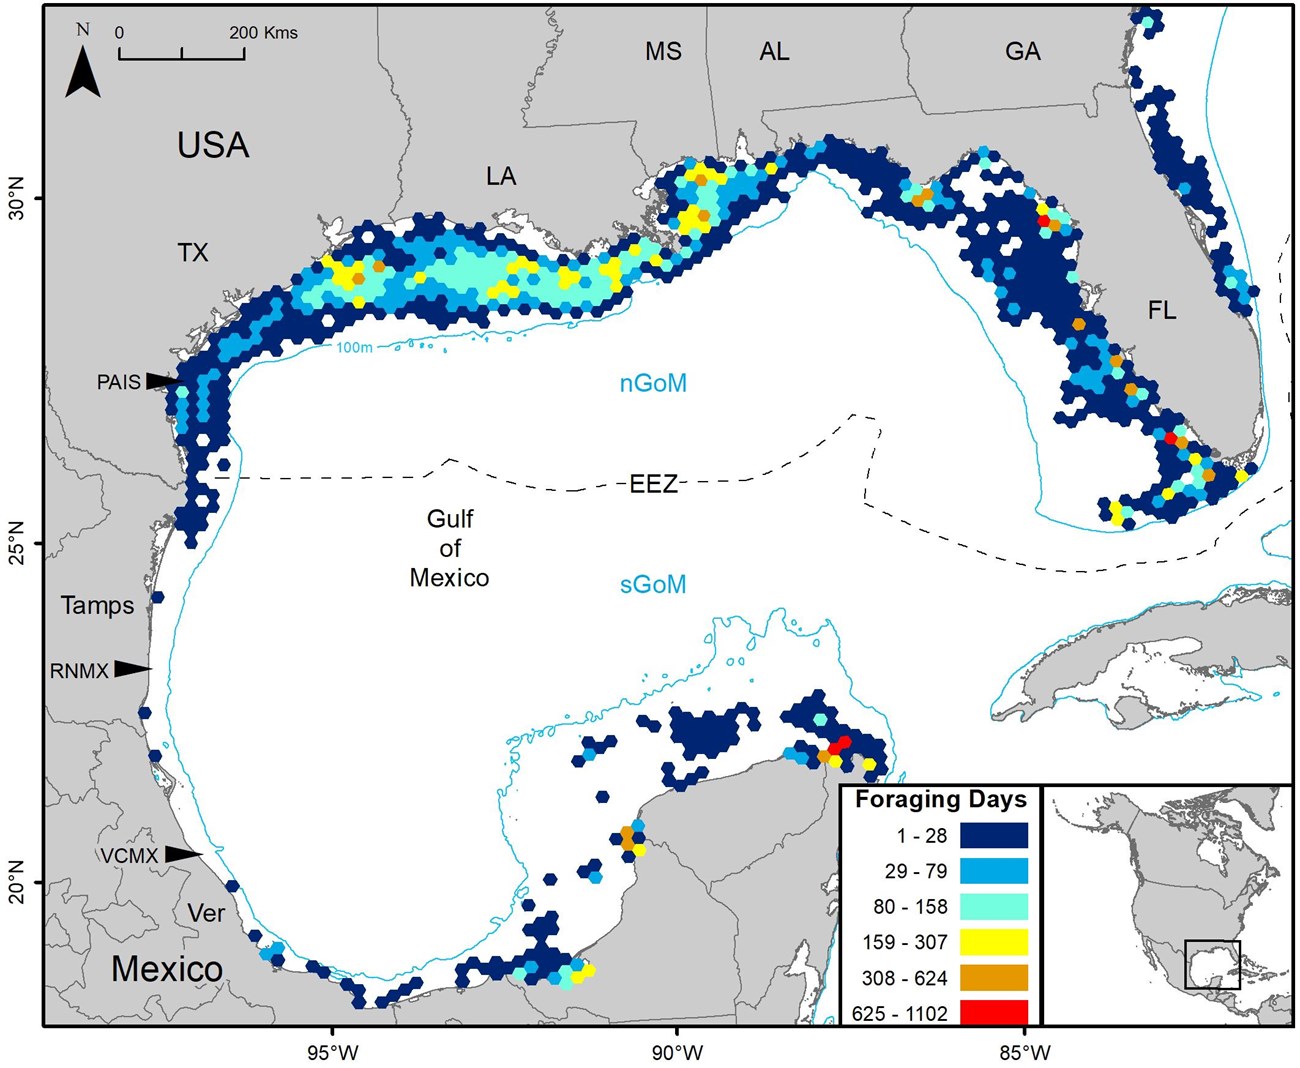 A map of the Gulf of Mexico with colored hexagons representing foraging days for sea turtles.  The hexagons are clustered along the northern edge of the Gulf, from Texas to Florida.